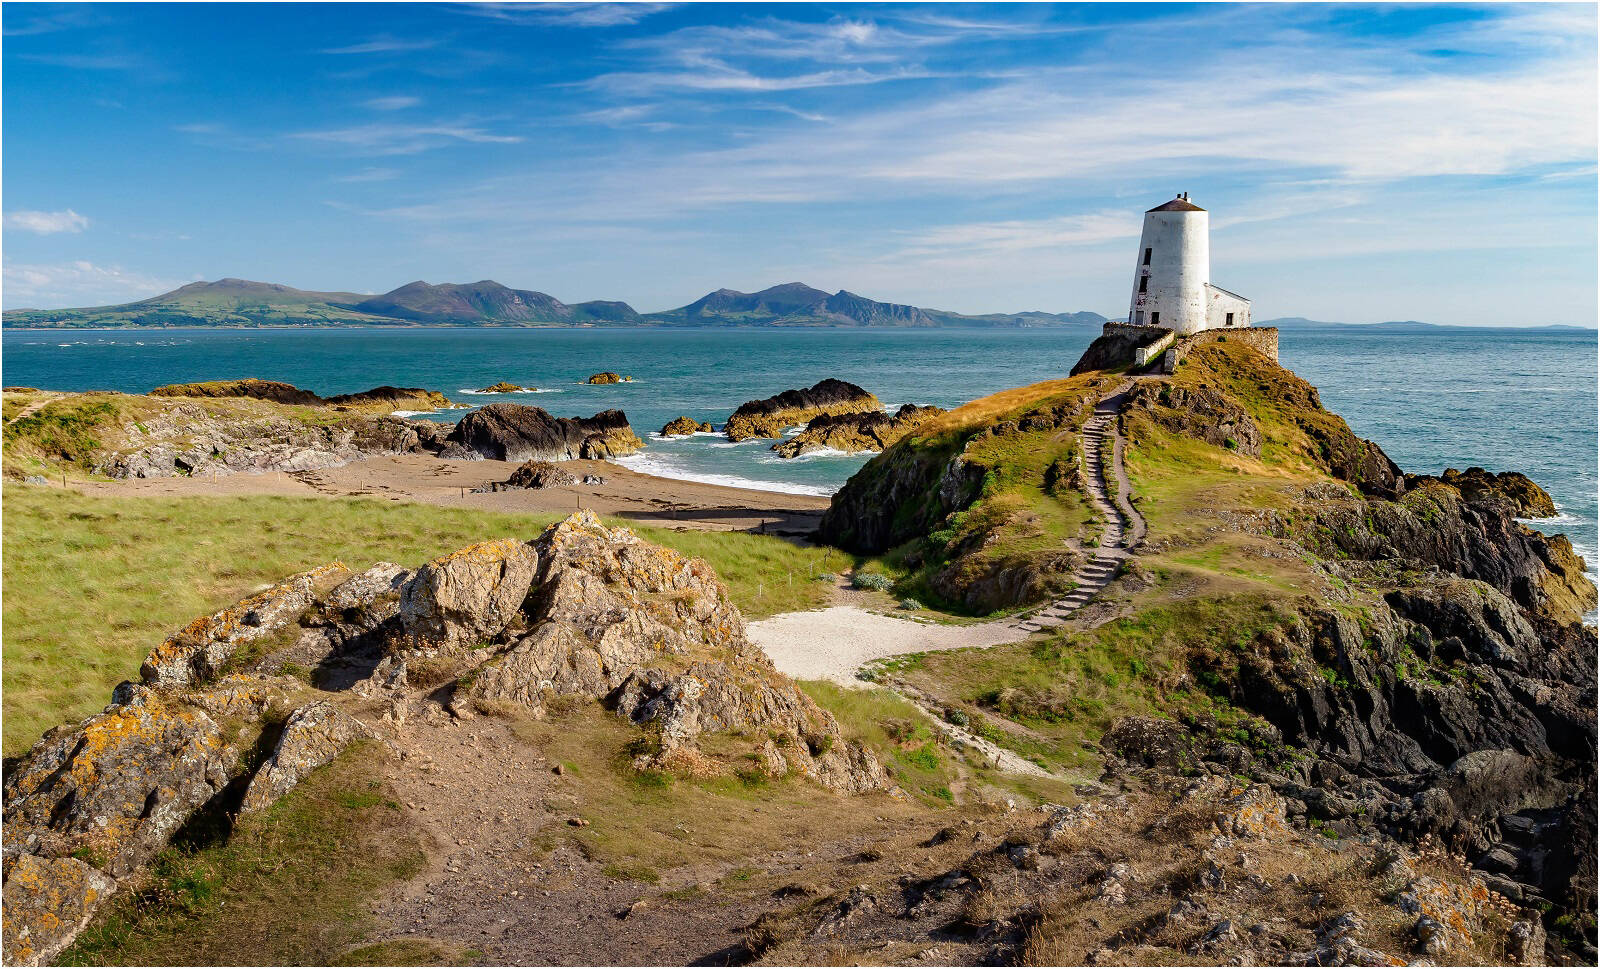 Image of Ynys Llanddwyn by Terence Rees